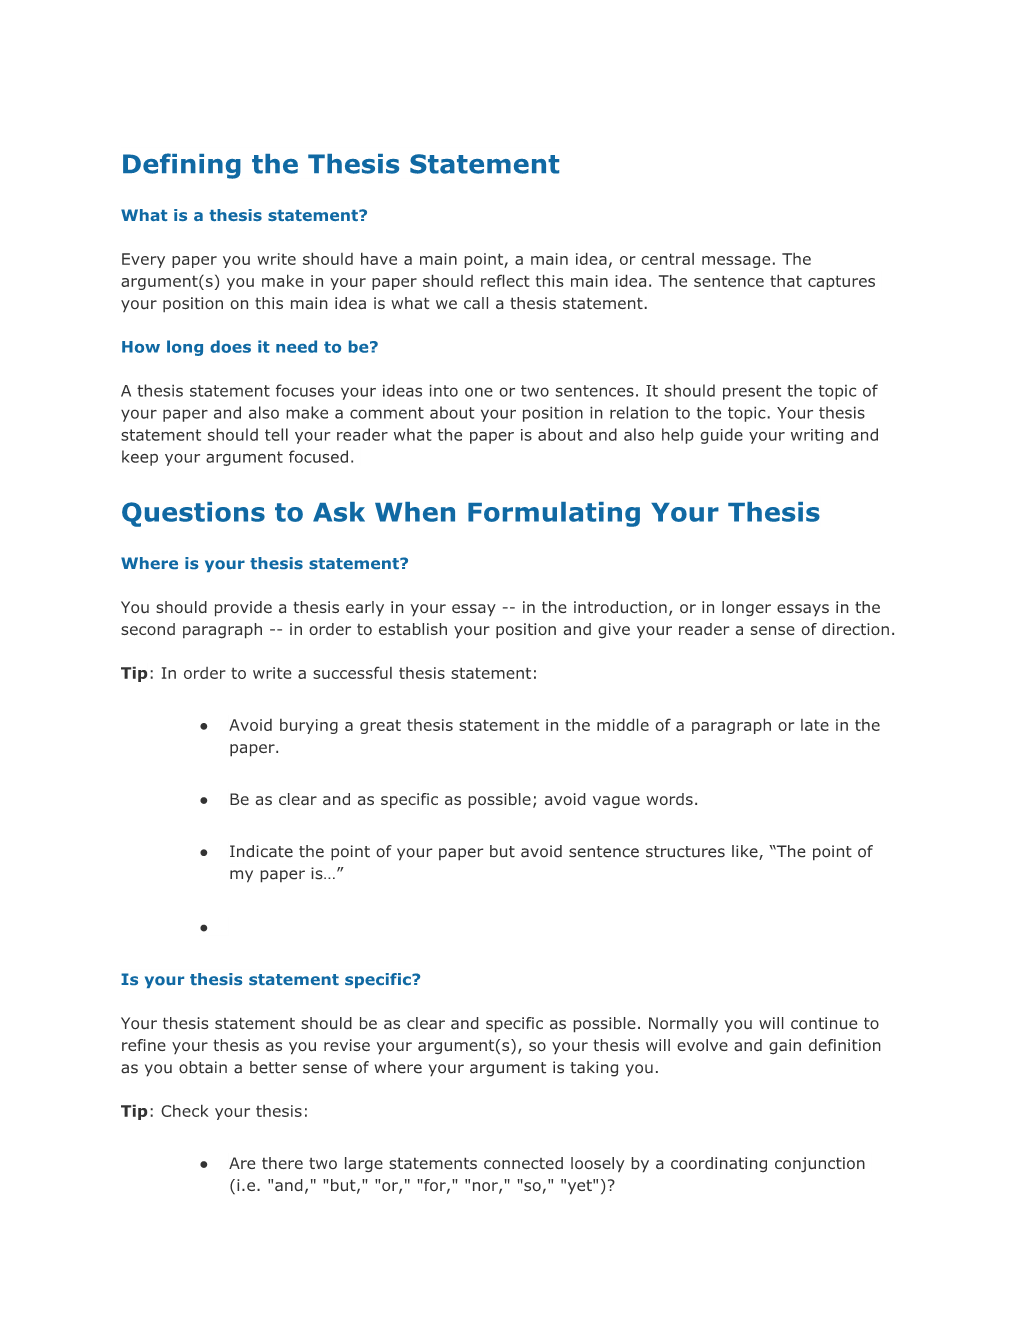 Defining the Thesis Statement